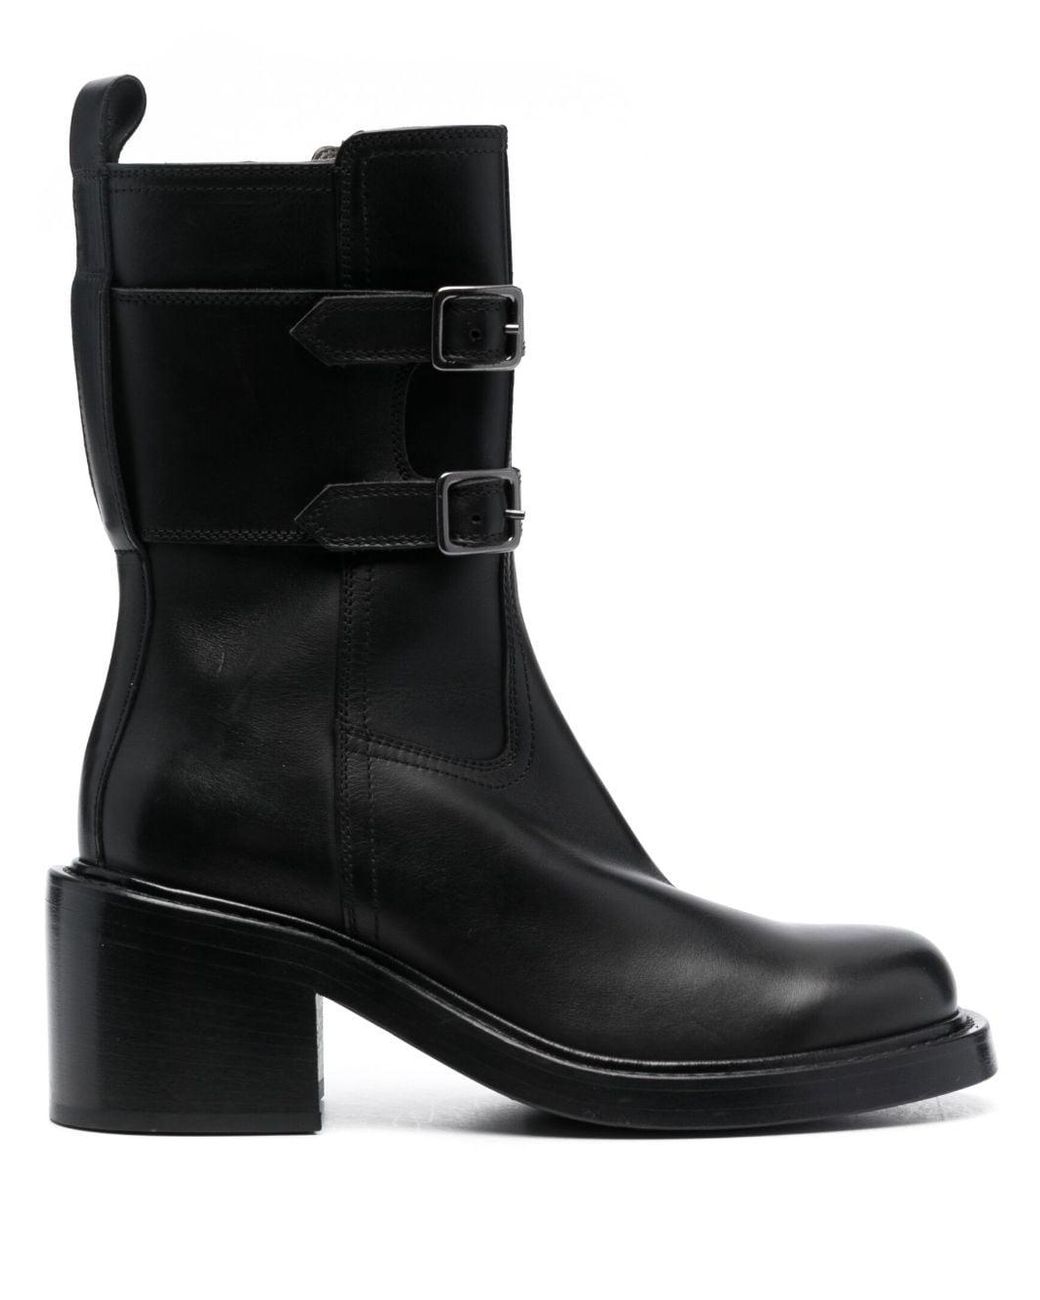 Officine Creative Venus 006 Leather 70mm Boots in Black | Lyst UK